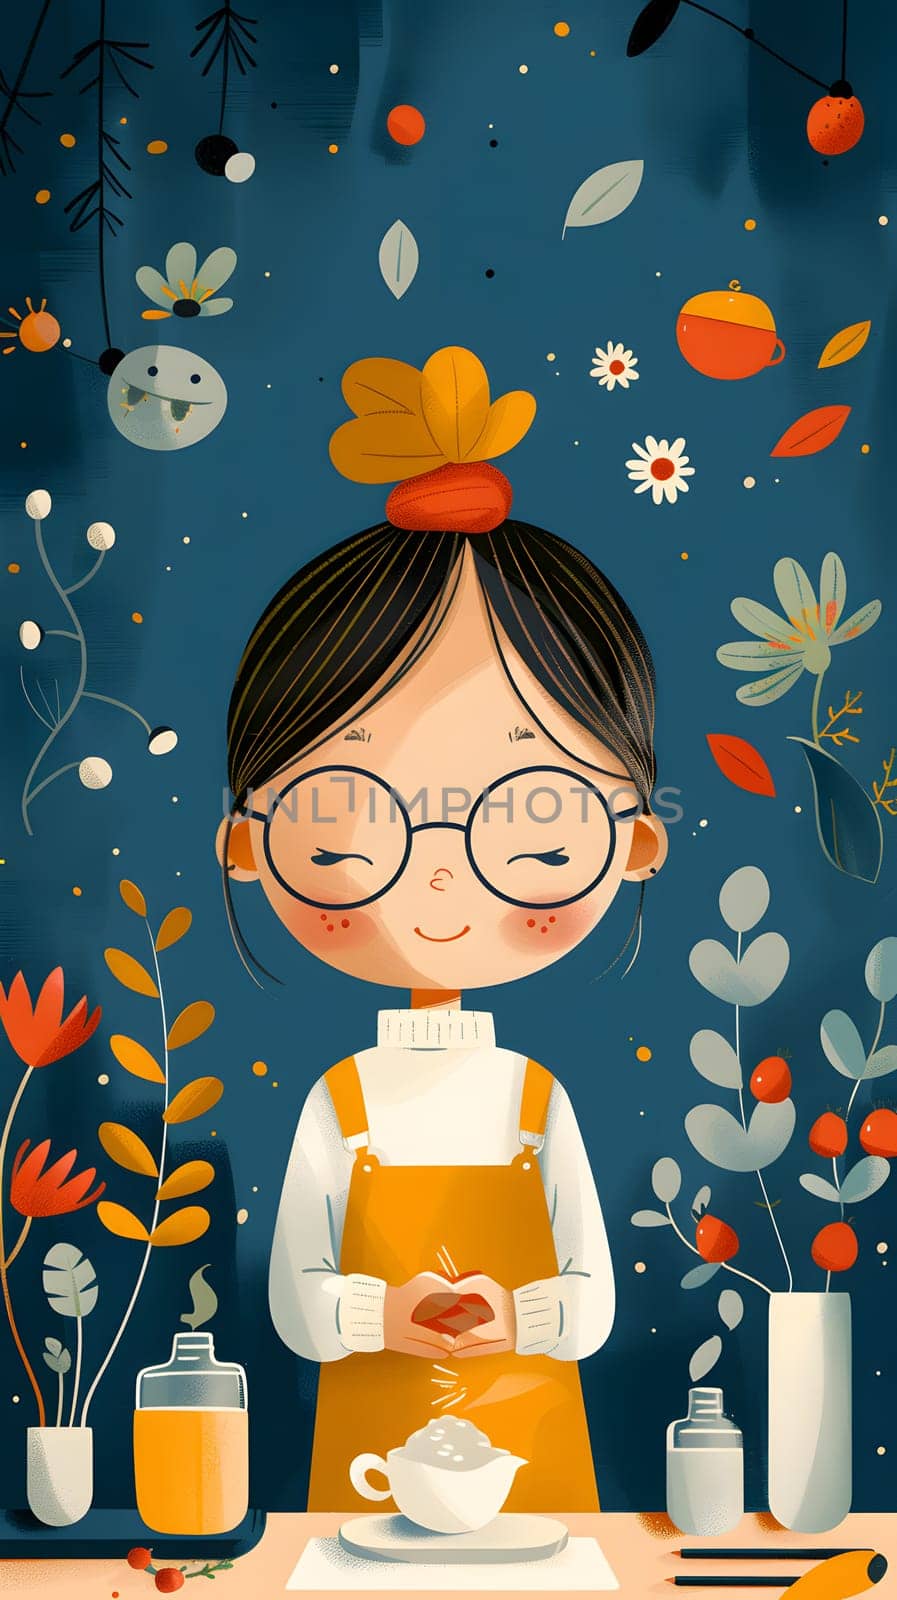 A happy girl with glasses is painting in an orange room, holding a cup of tea by Nadtochiy